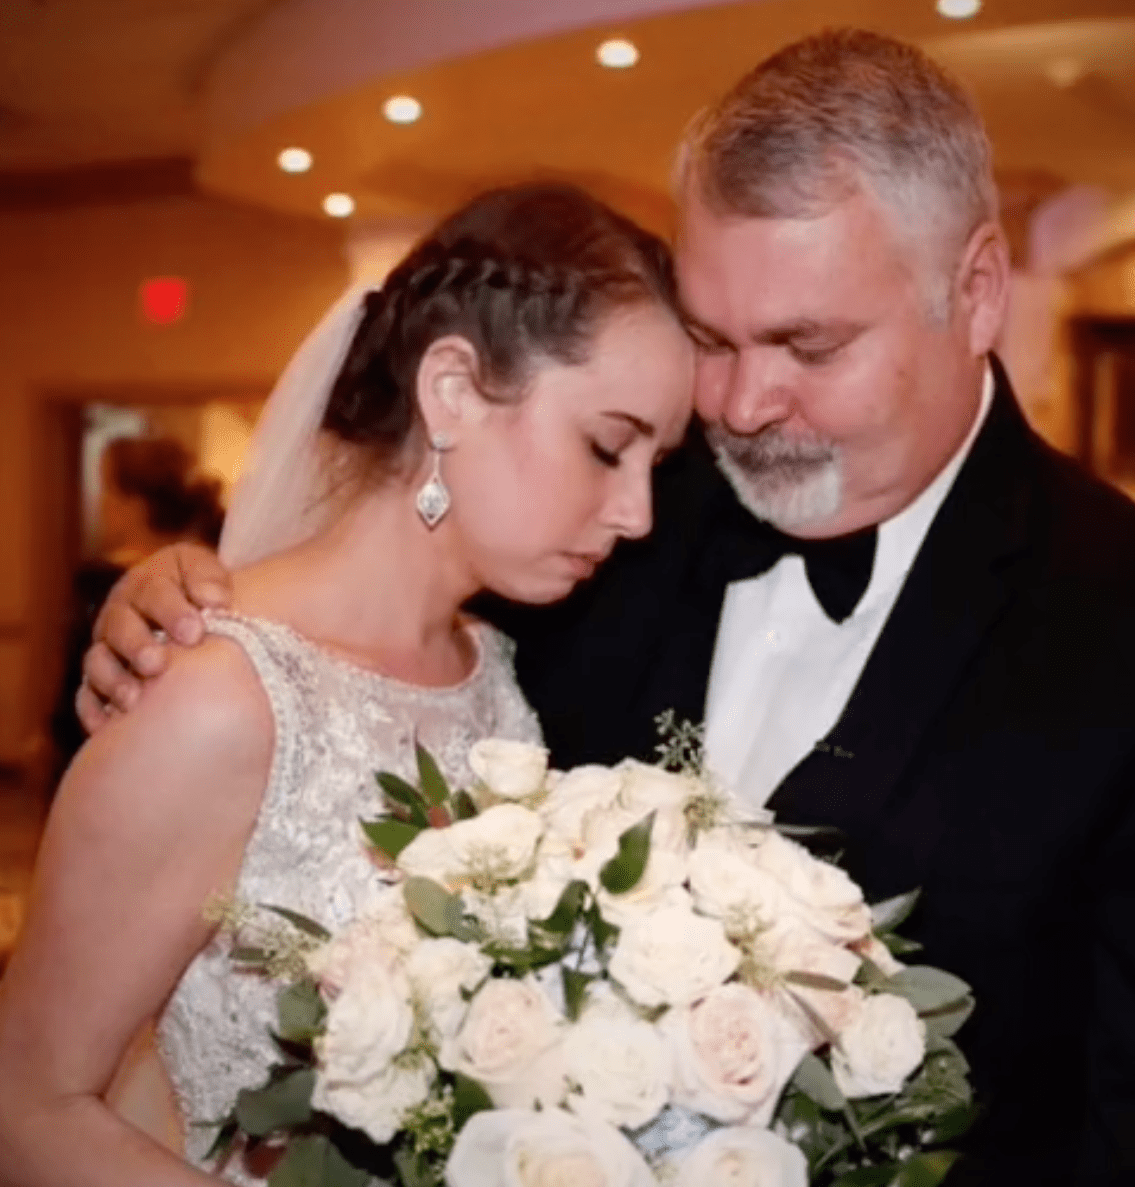 Man Loses His Daughter Shortly before Her Wedding – Another Bride Walked Down the Aisle With Him.